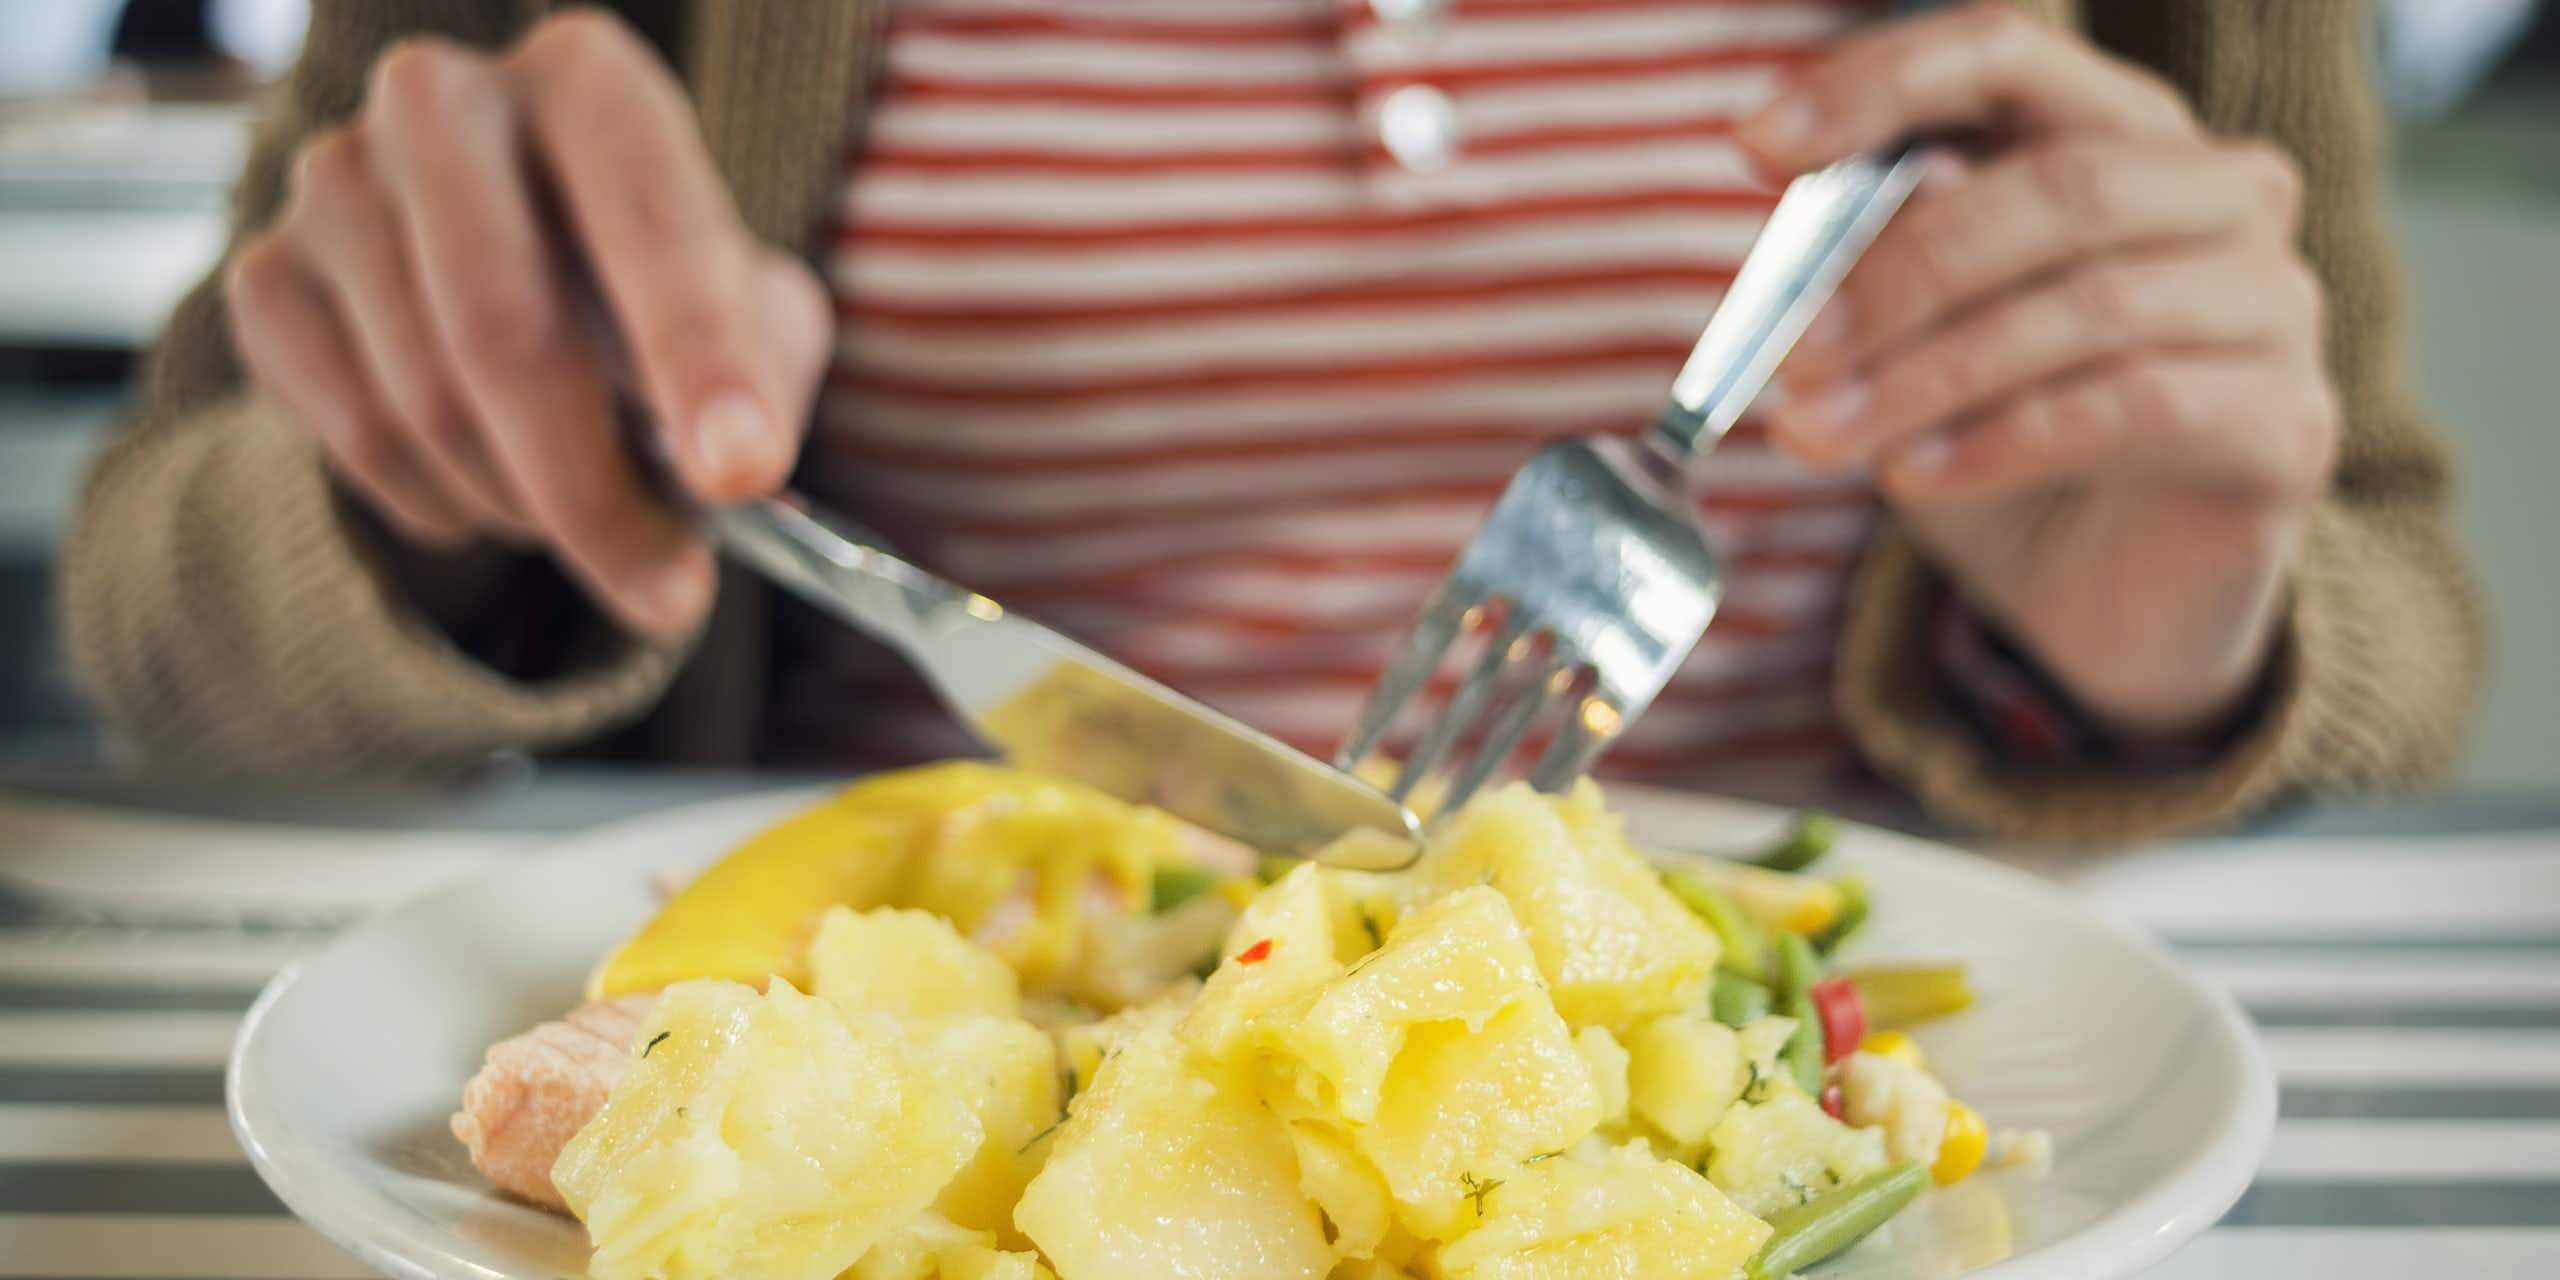 A woman uses a fork and knife to cut into a cooked potato.